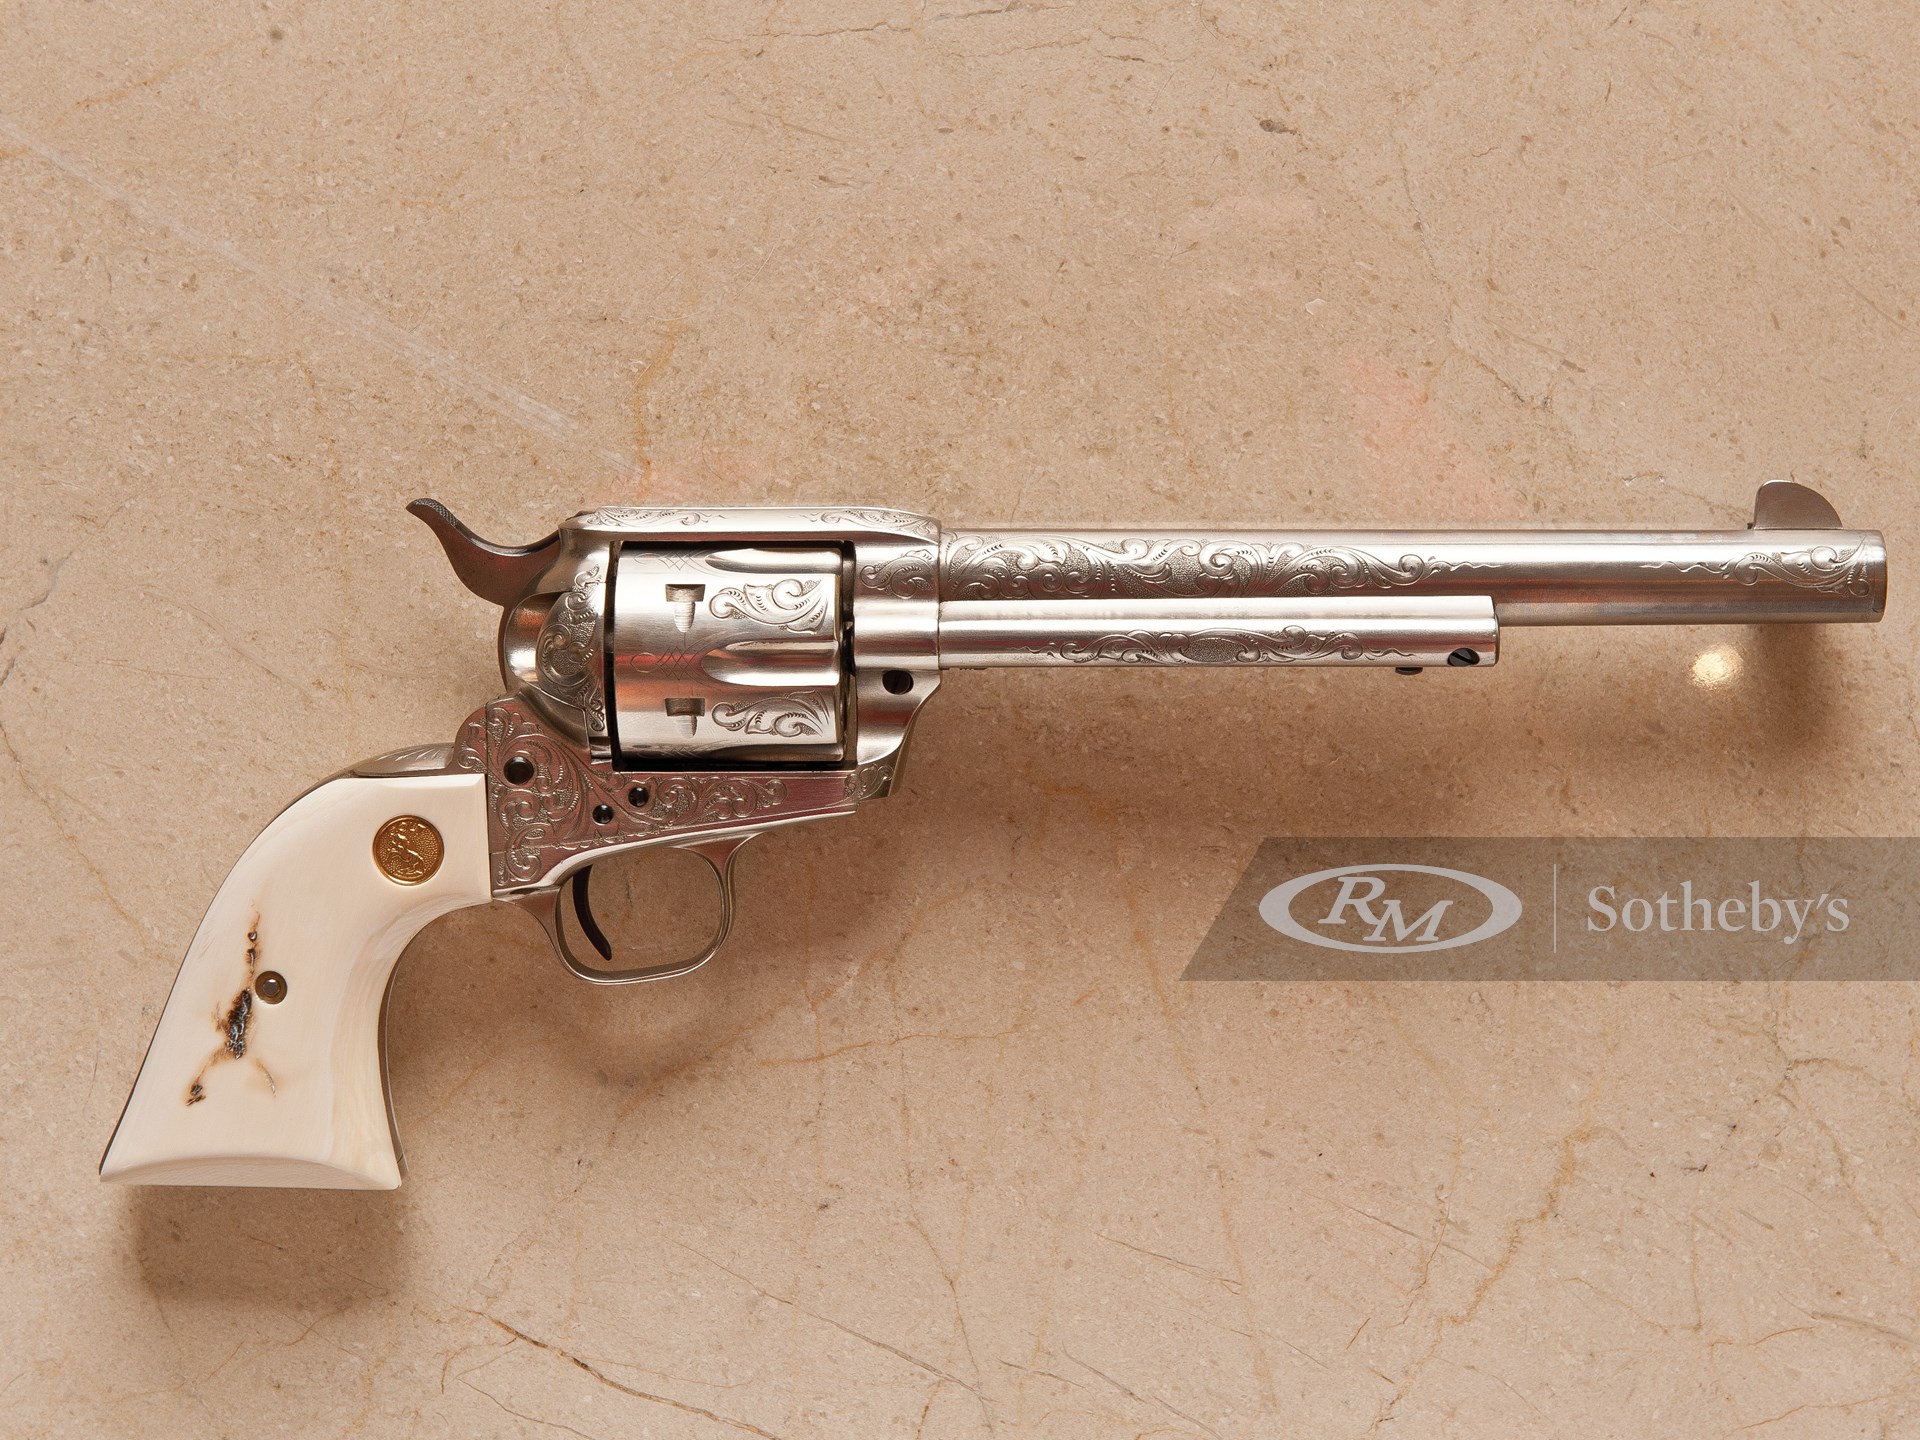 Colt 45 Caliber Single Action Army Revolver The Milhous Collection 2012 Rm Sotheby S